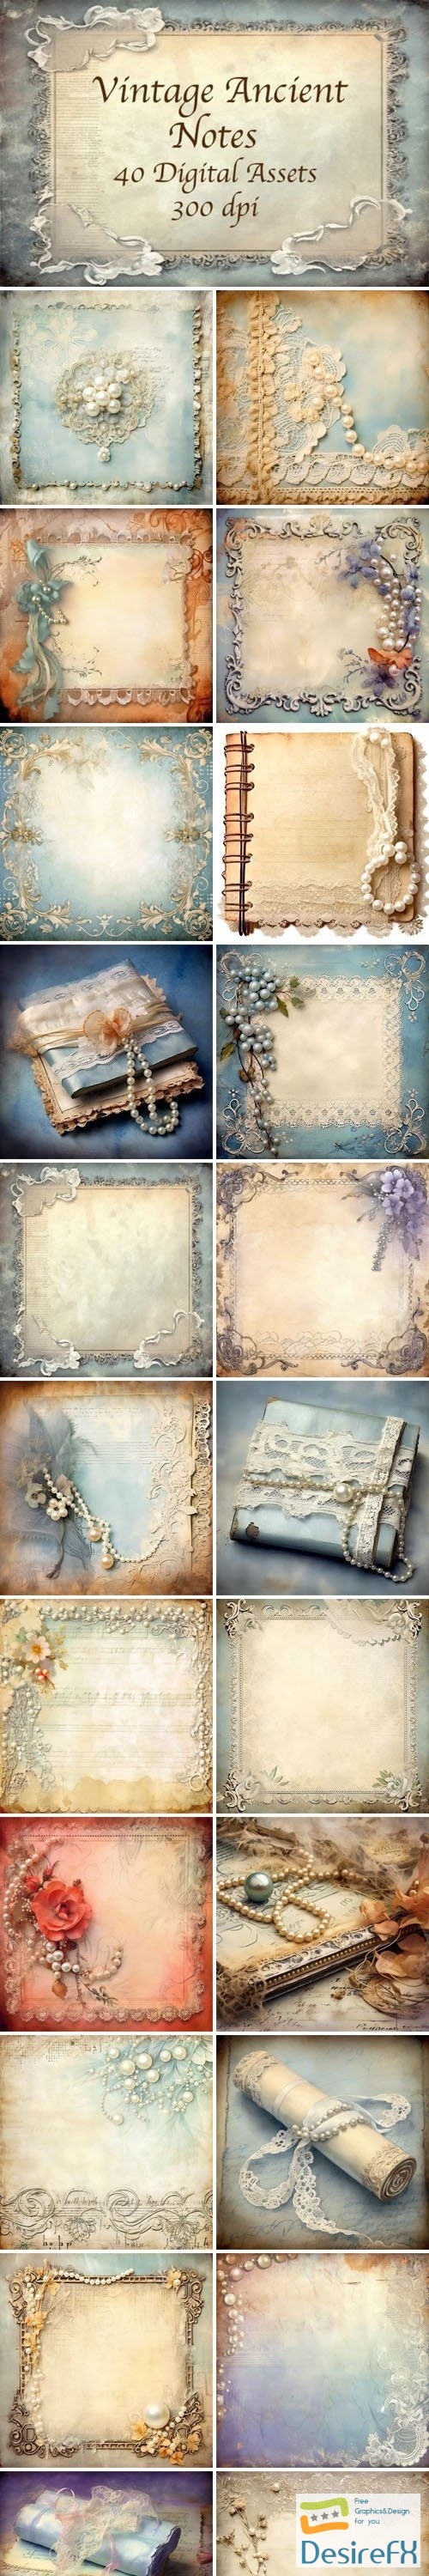 Ancient Notes - Vintage Textures Pack